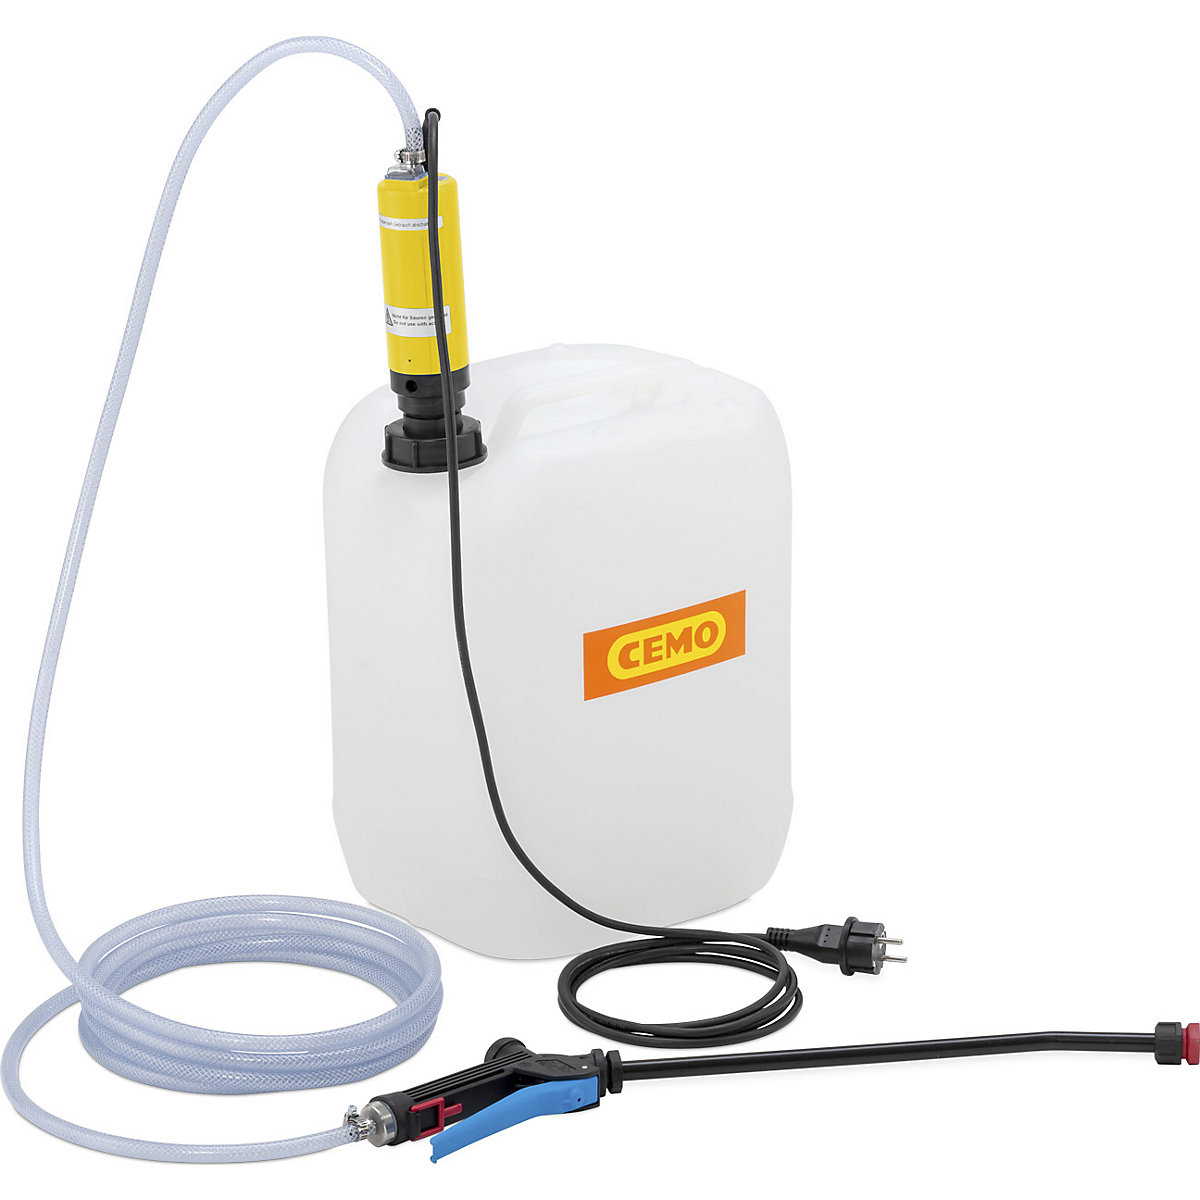 Electric sprayer with canister for disinfectant solutions – CEMO